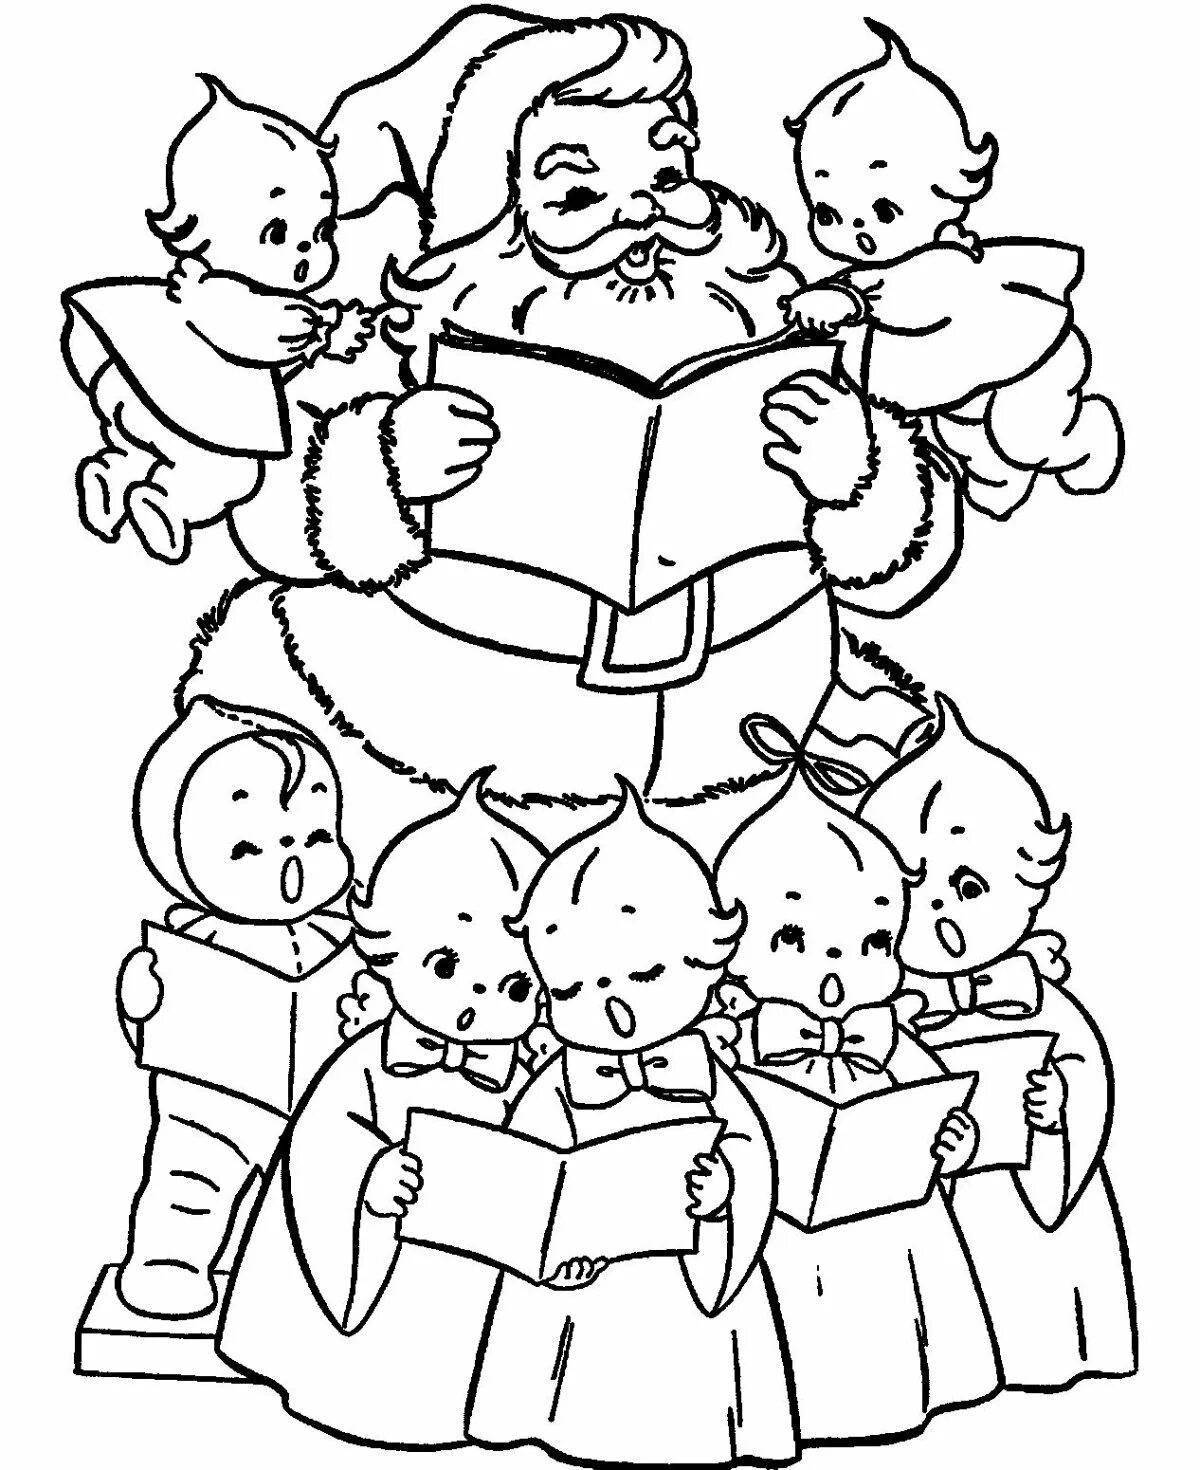 Colorful Christmas carols coloring pages for kids